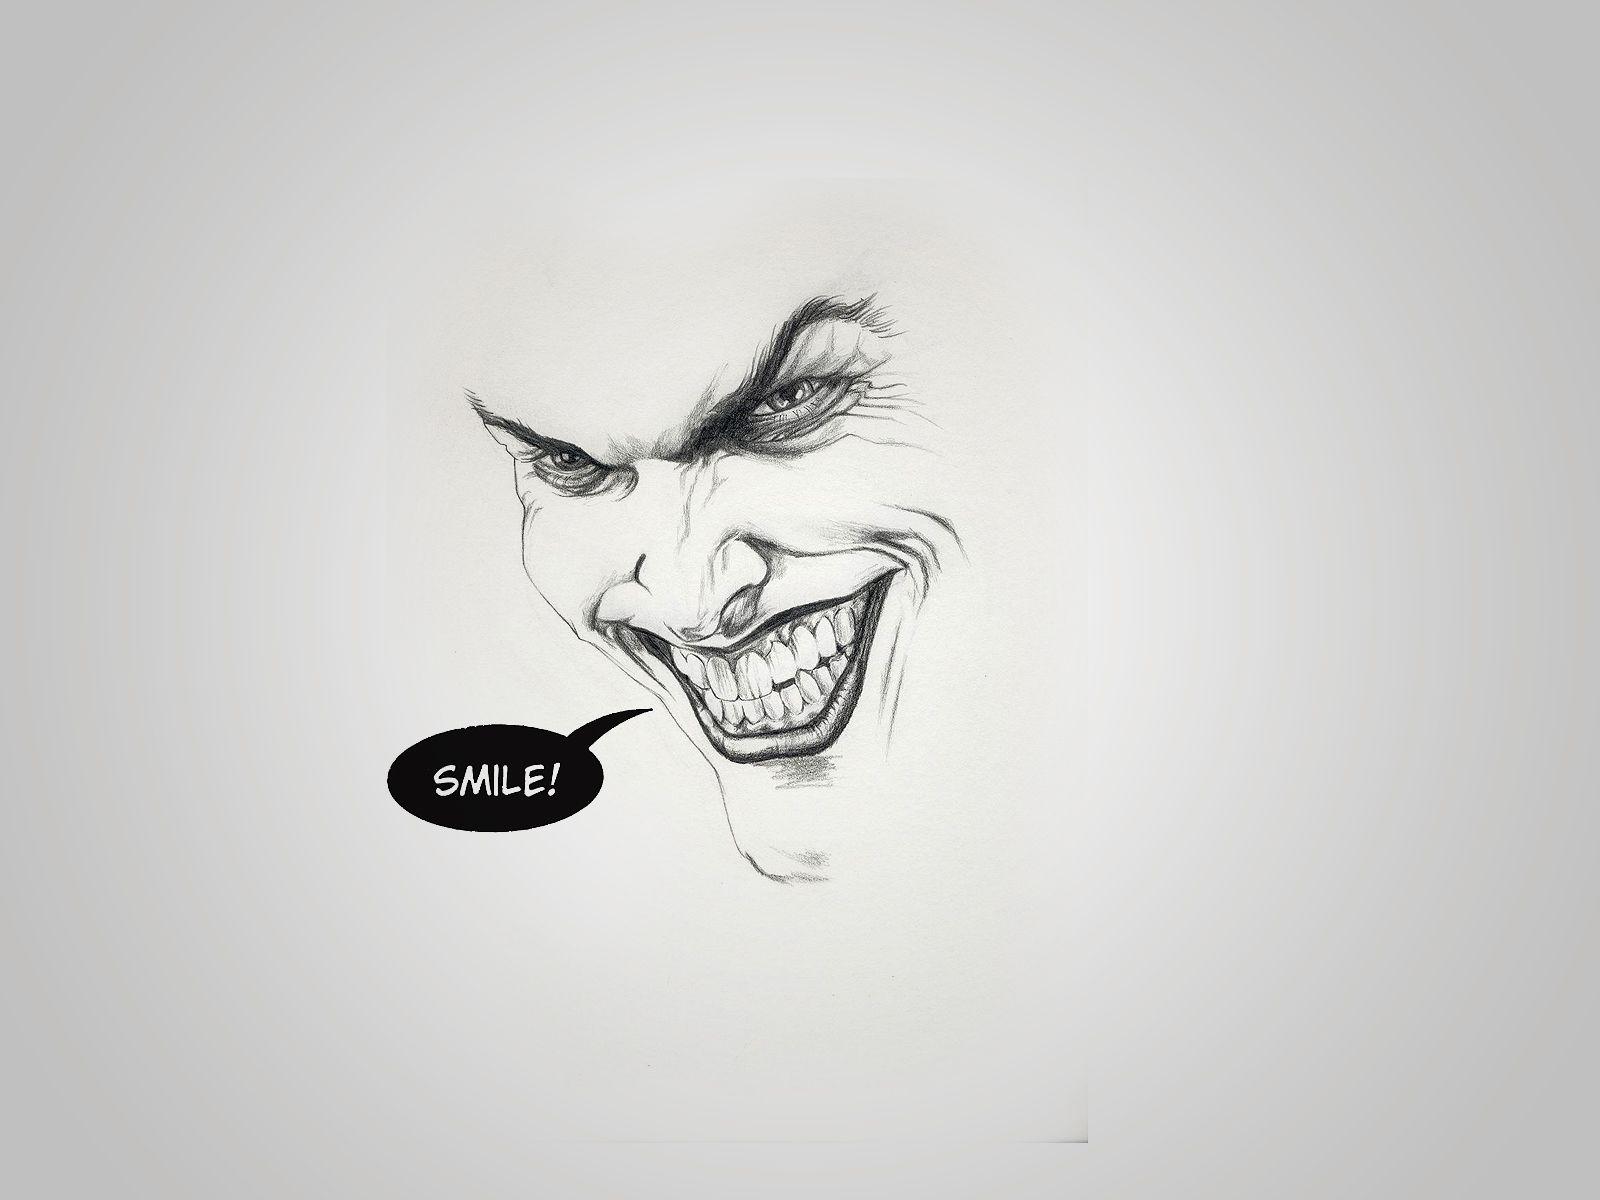 Drawn Joker wallpaper and image, picture, photo